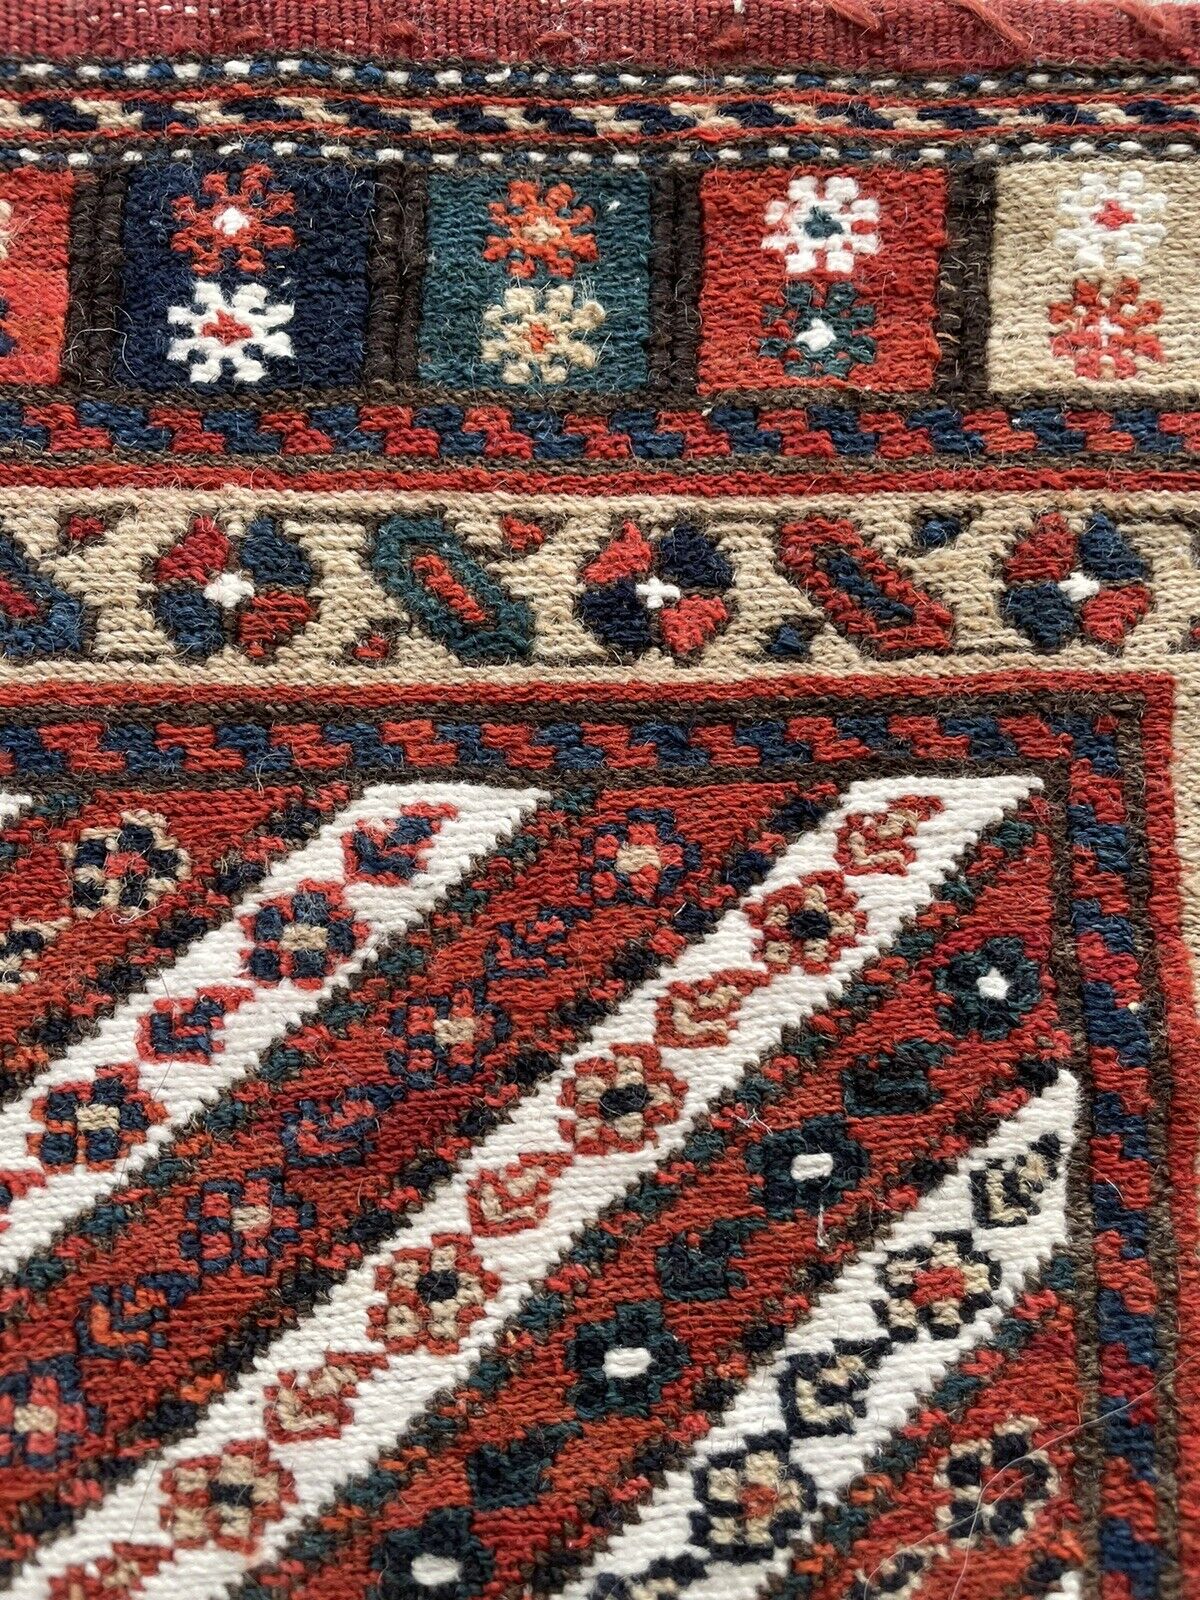 Close-up of vibrant colors on Handmade Vintage Persian Kurdish Salt Bag - Detailed view showcasing the vibrant natural colors of the salt bag's design, including red, black, white, and blue.